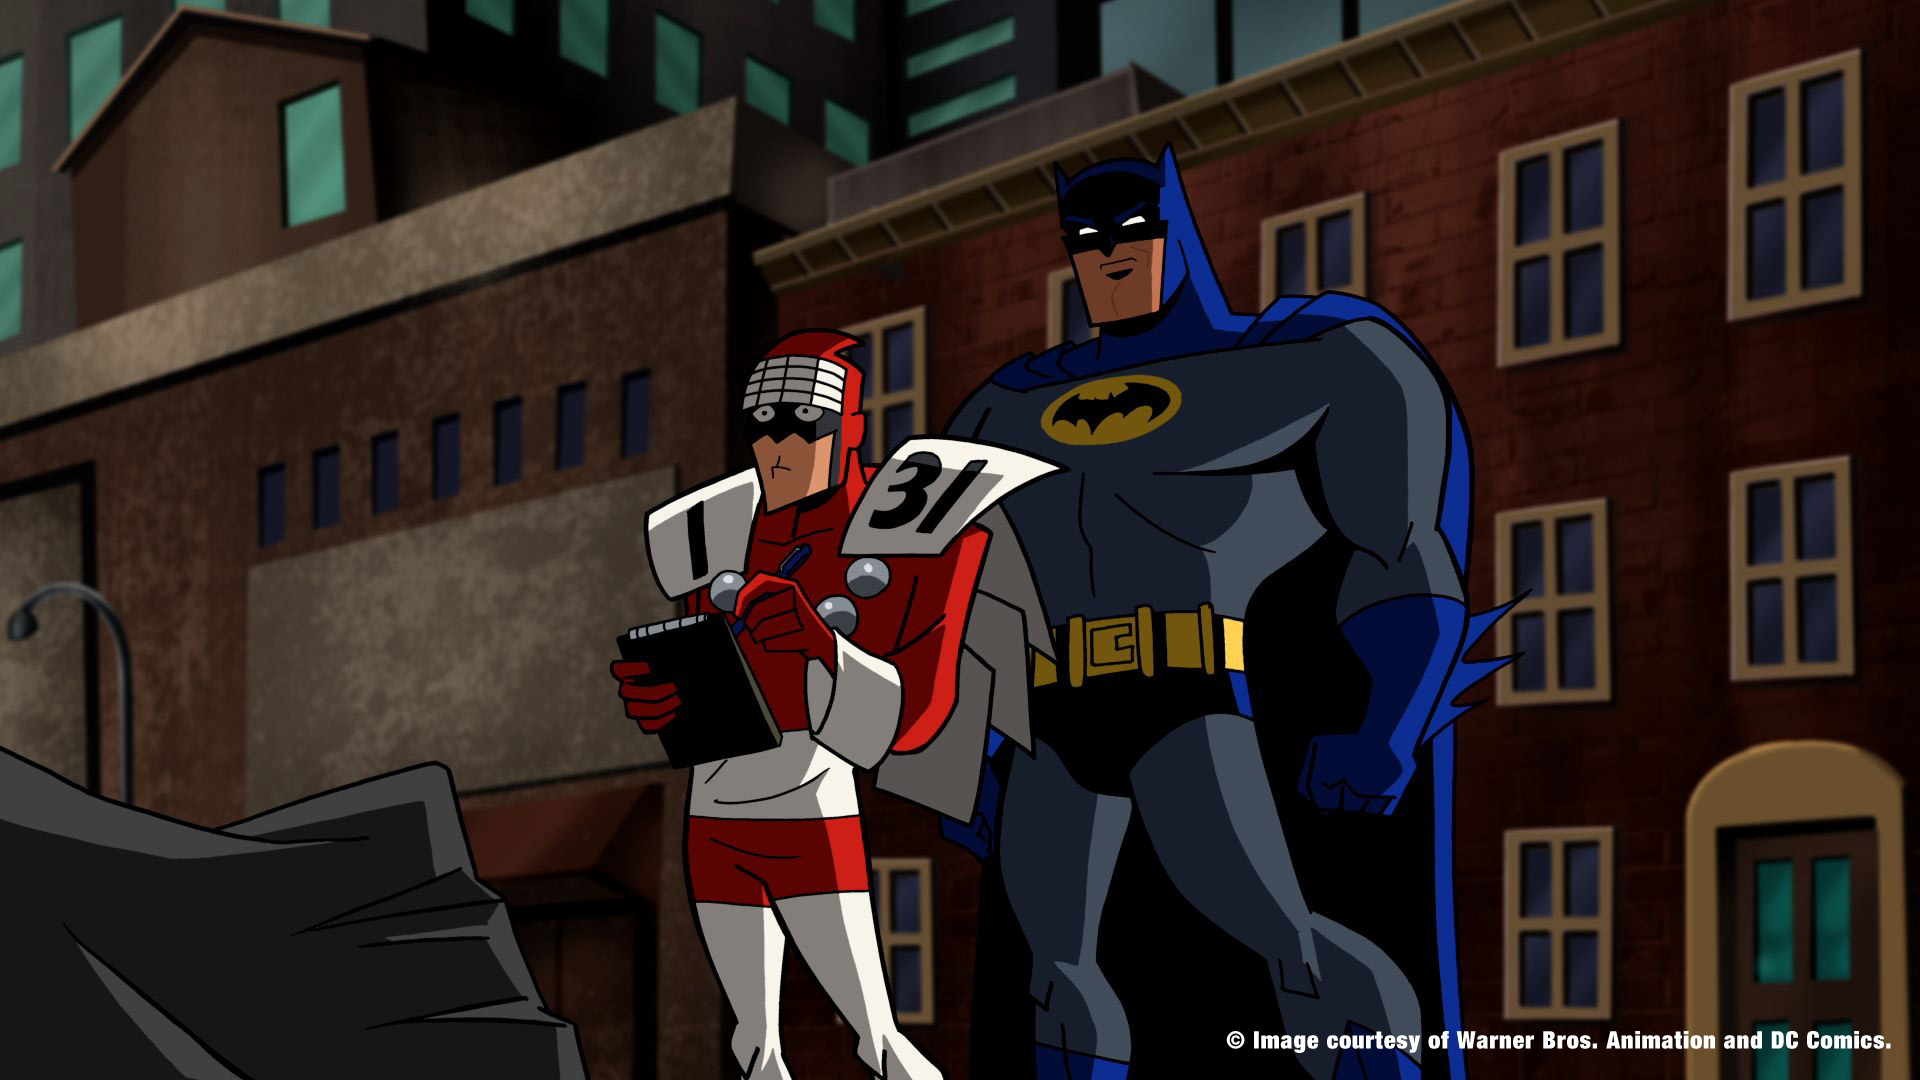 TV Show Batman: The Brave and the Bold HD Wallpaper | Background Image